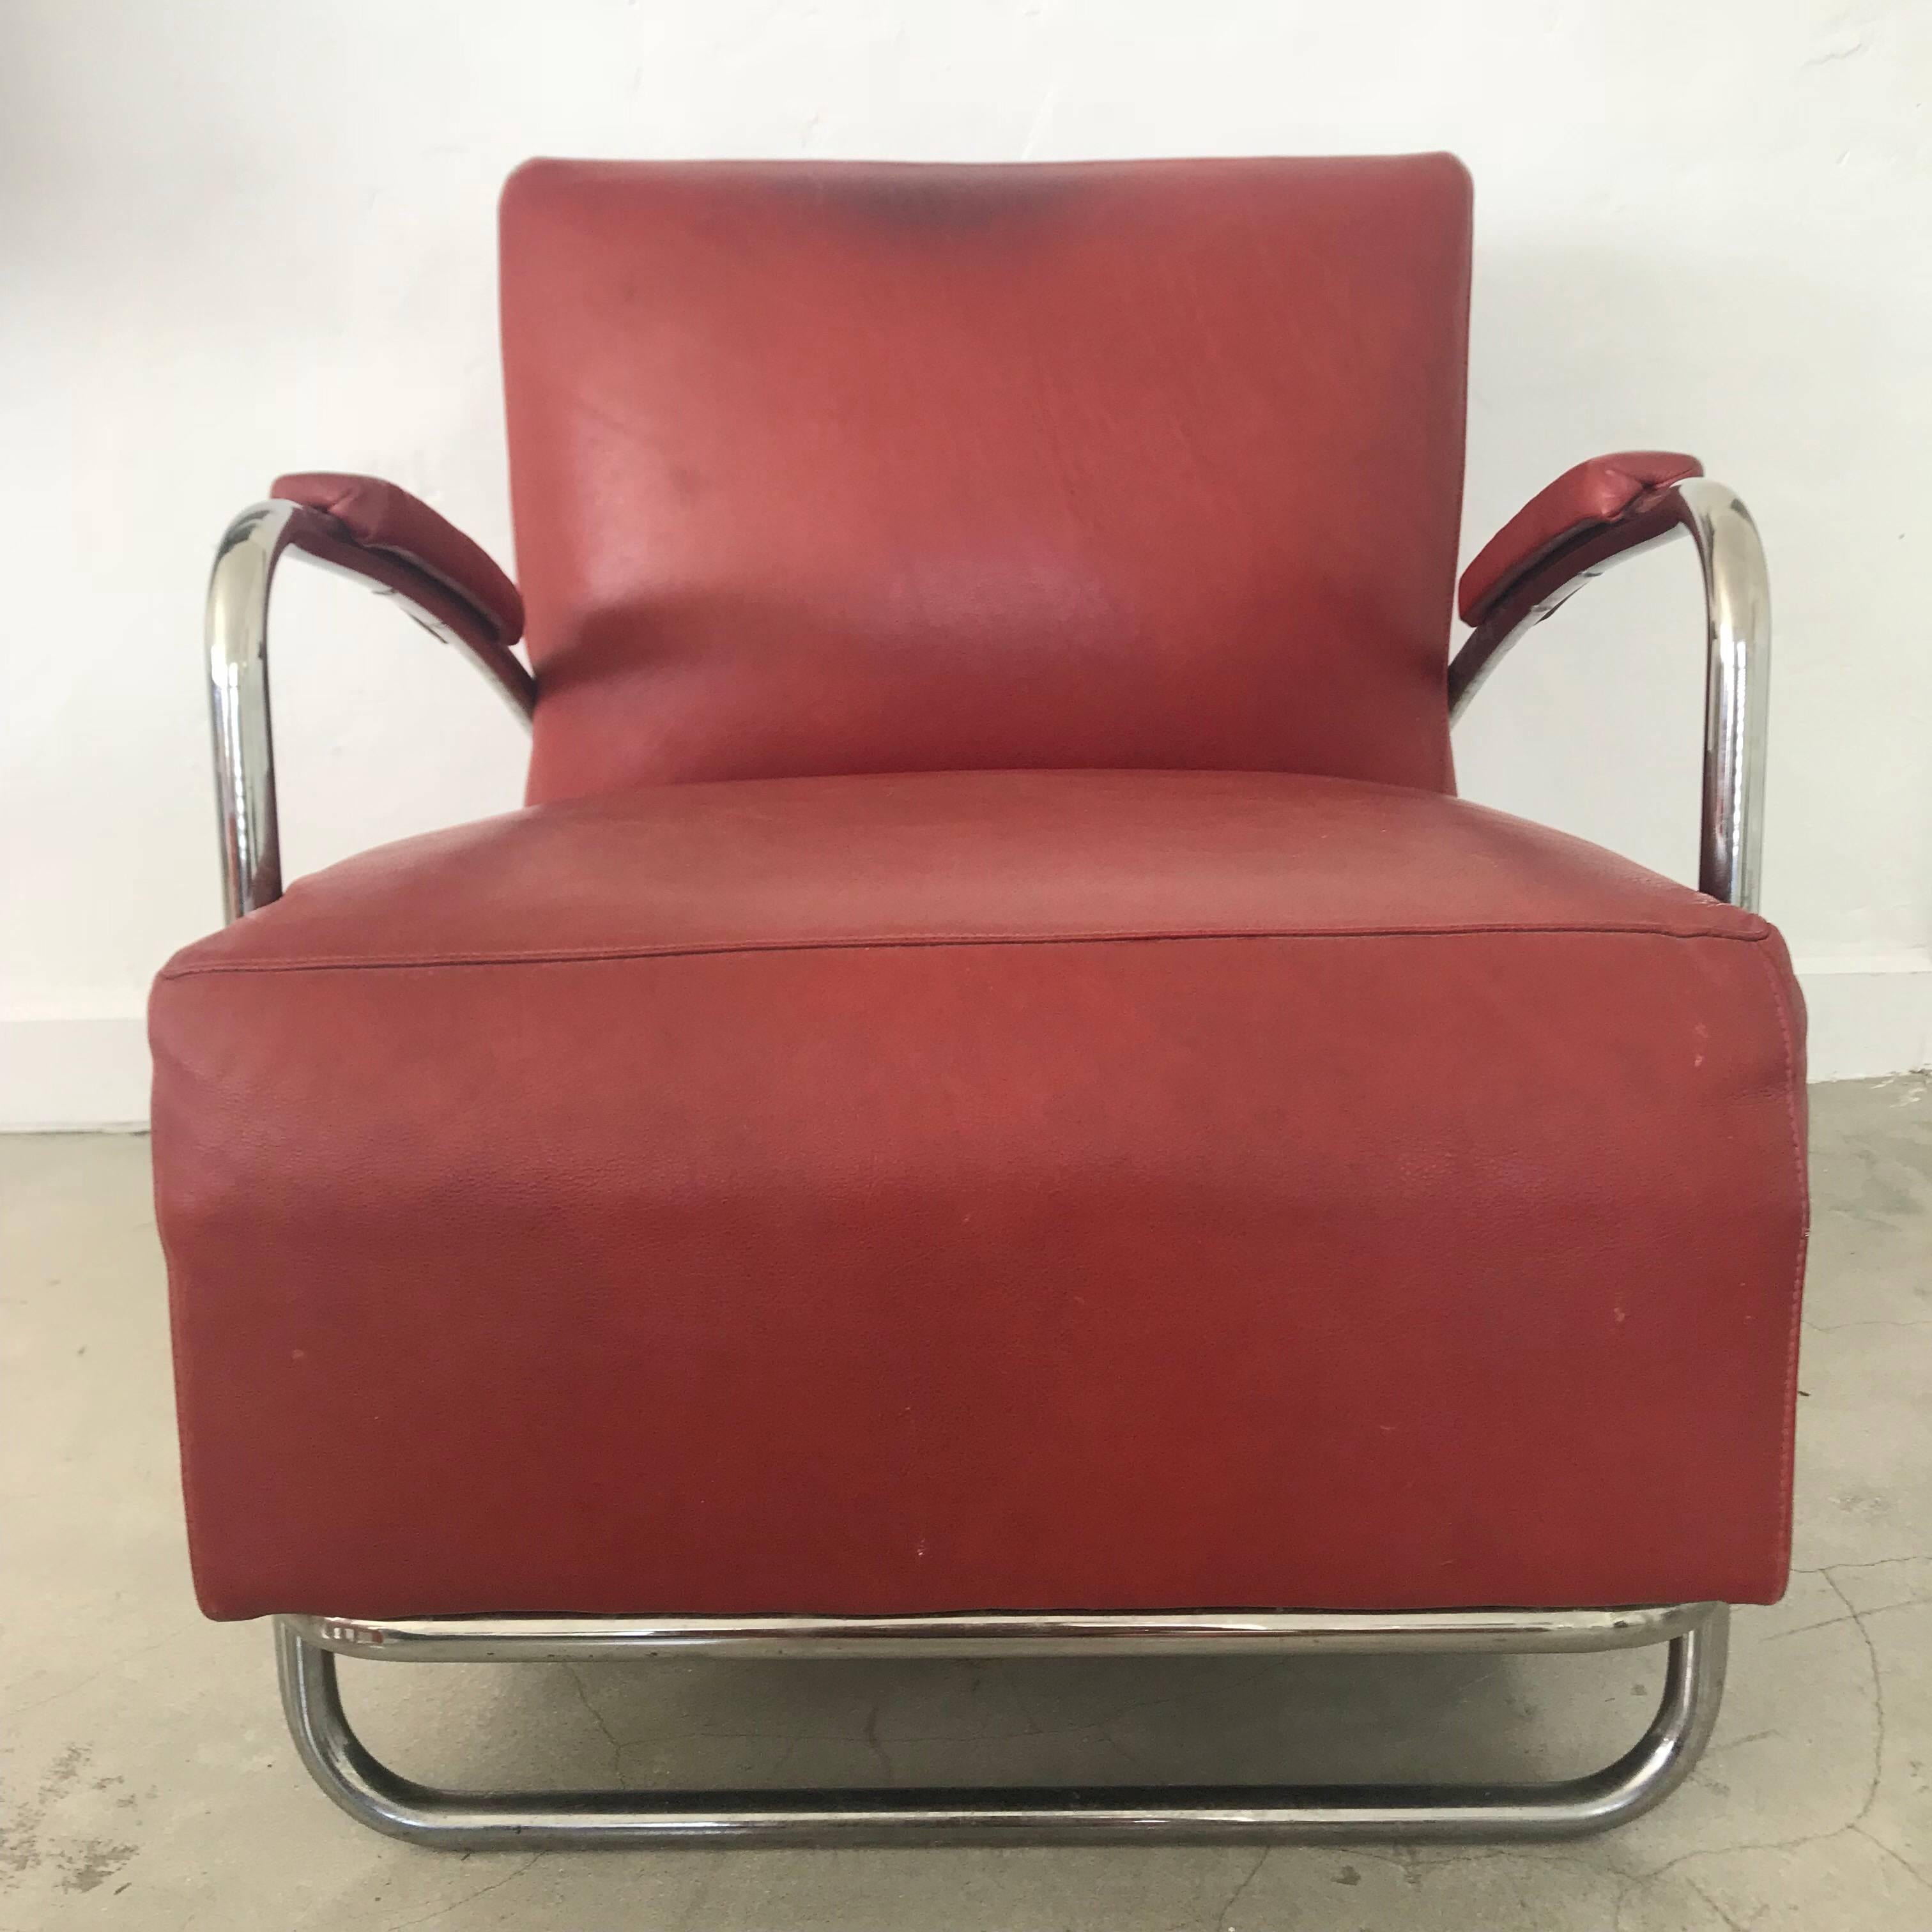 Plated Art Deco Tubular Chrome and Red Leather Chair